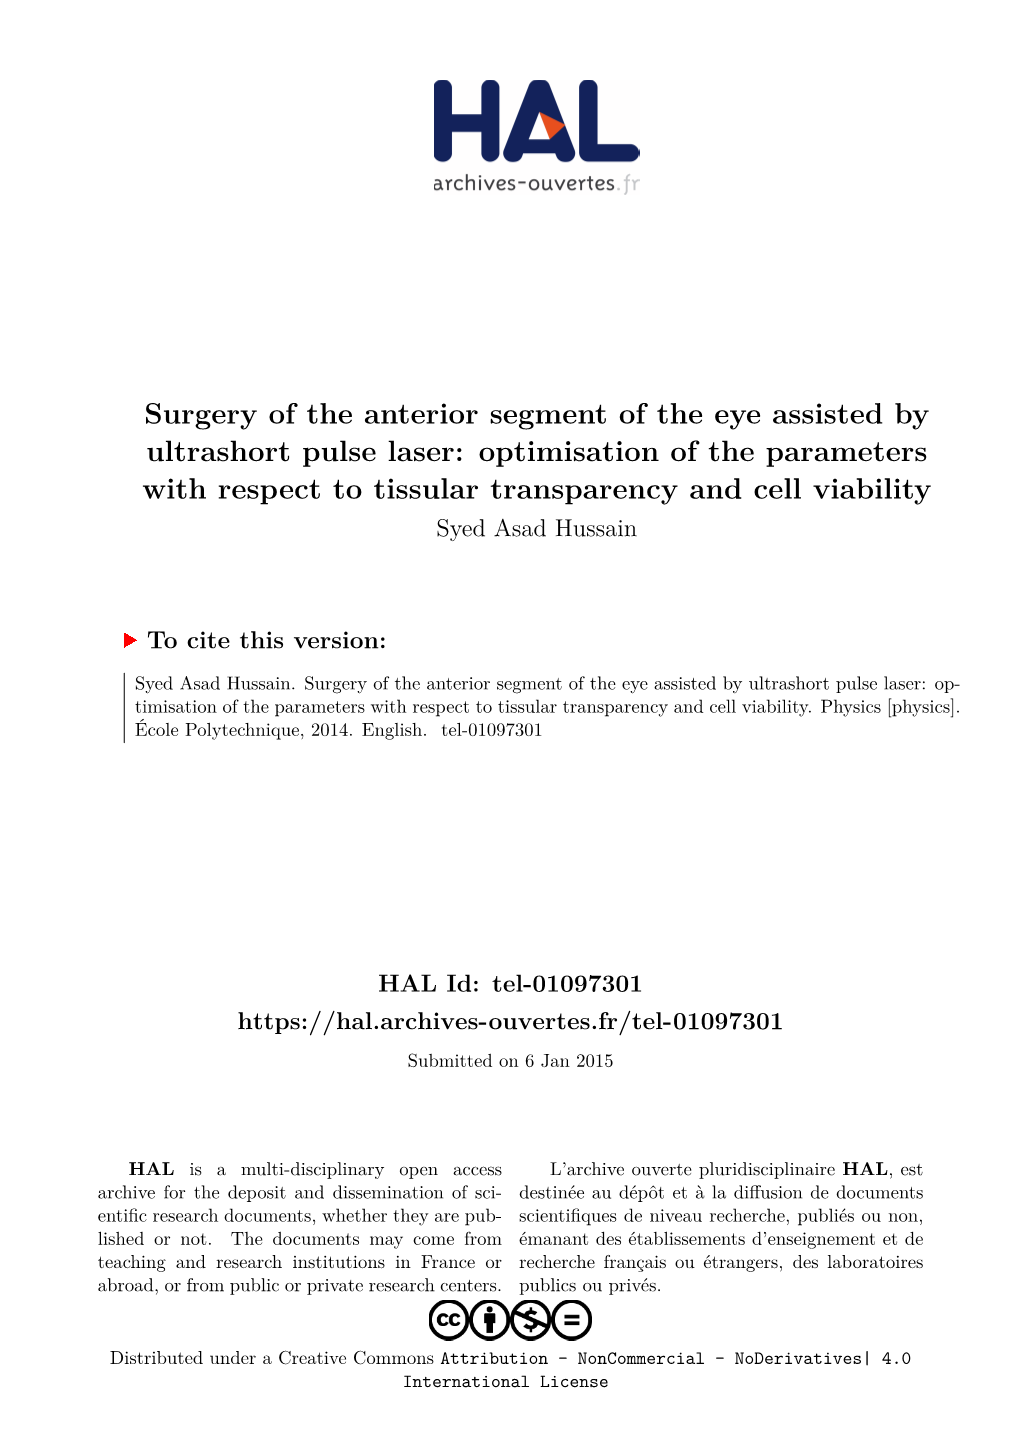 Surgery of the Anterior Segment of the Eye Assisted by Ultrashort Pulse Laser